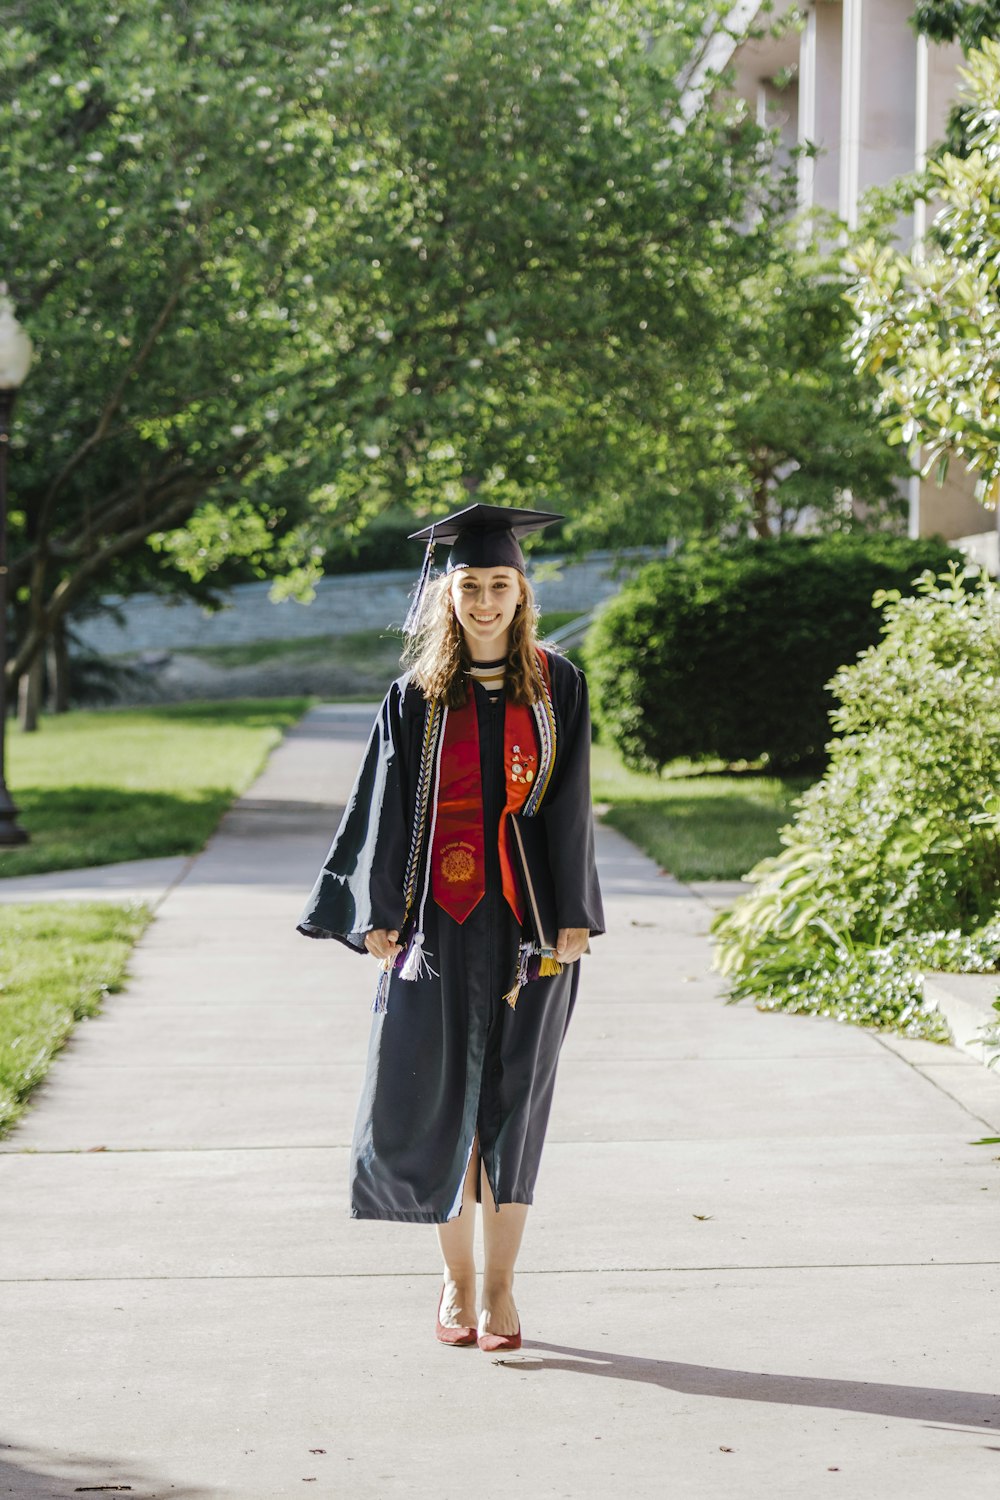 woman in black academic dress and black academic dress standing on gray concrete pathway during daytime